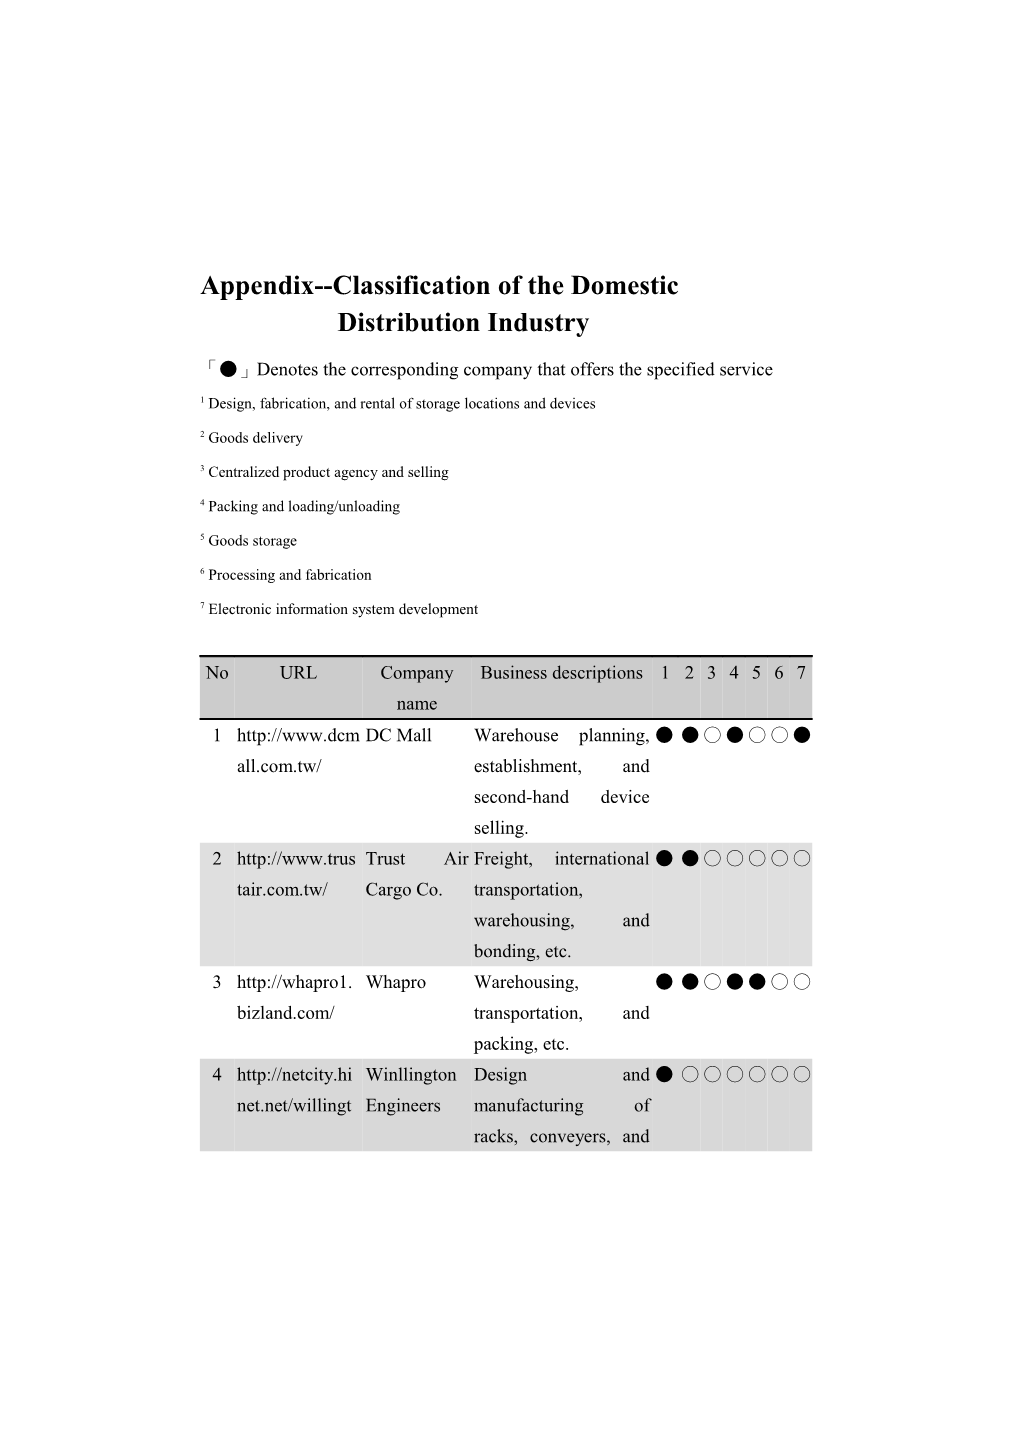 Appendix Classification of the Domestic Distribution Industry